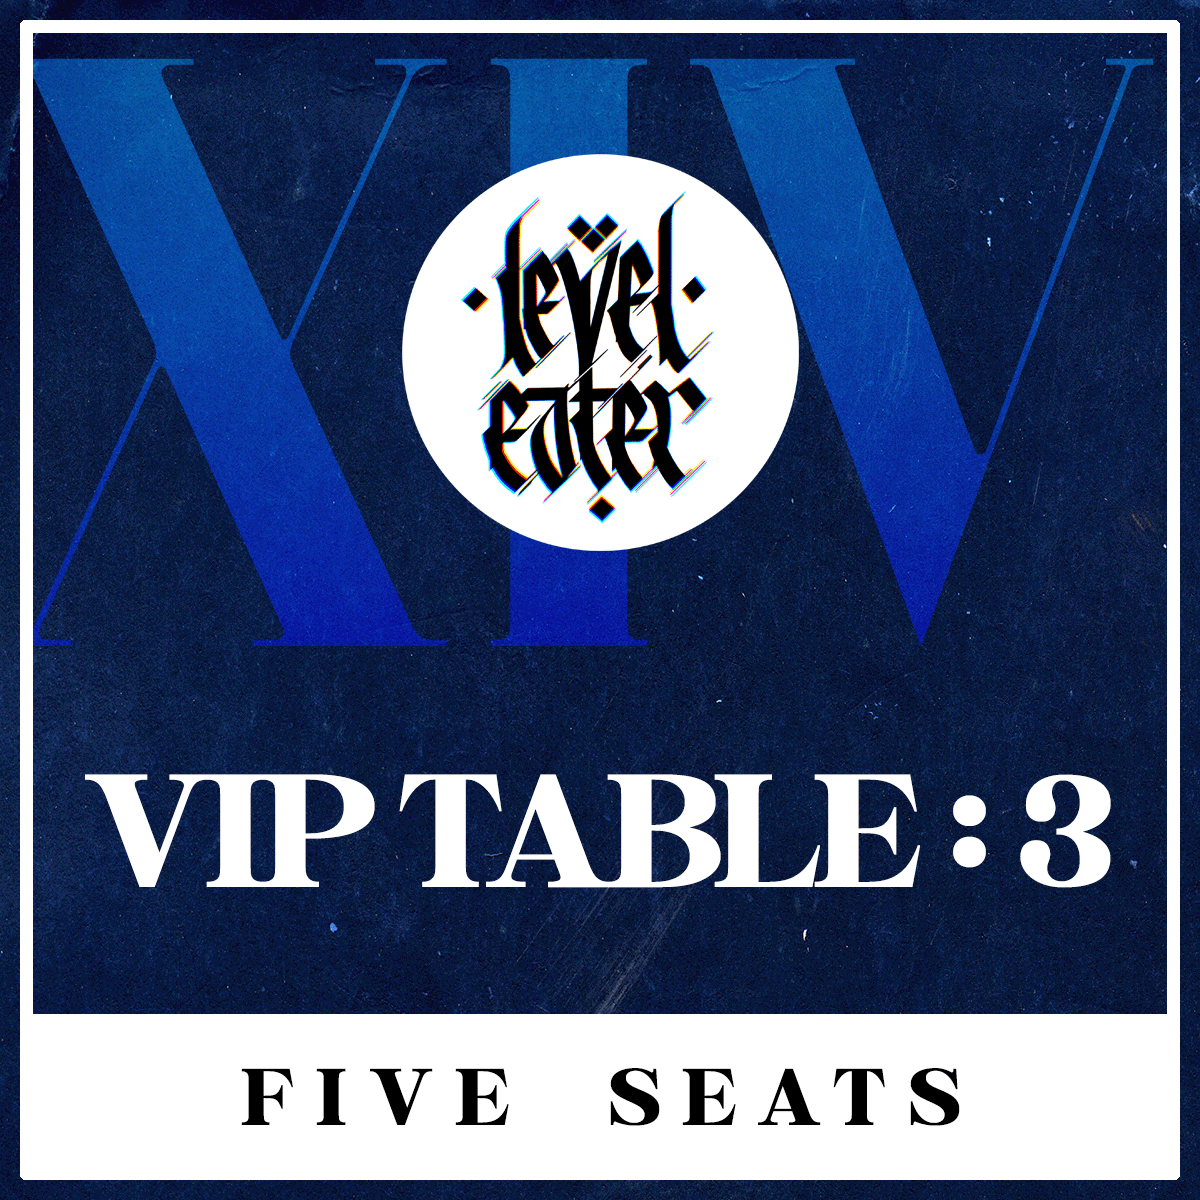 Blue and white image indicating VIP Table #3